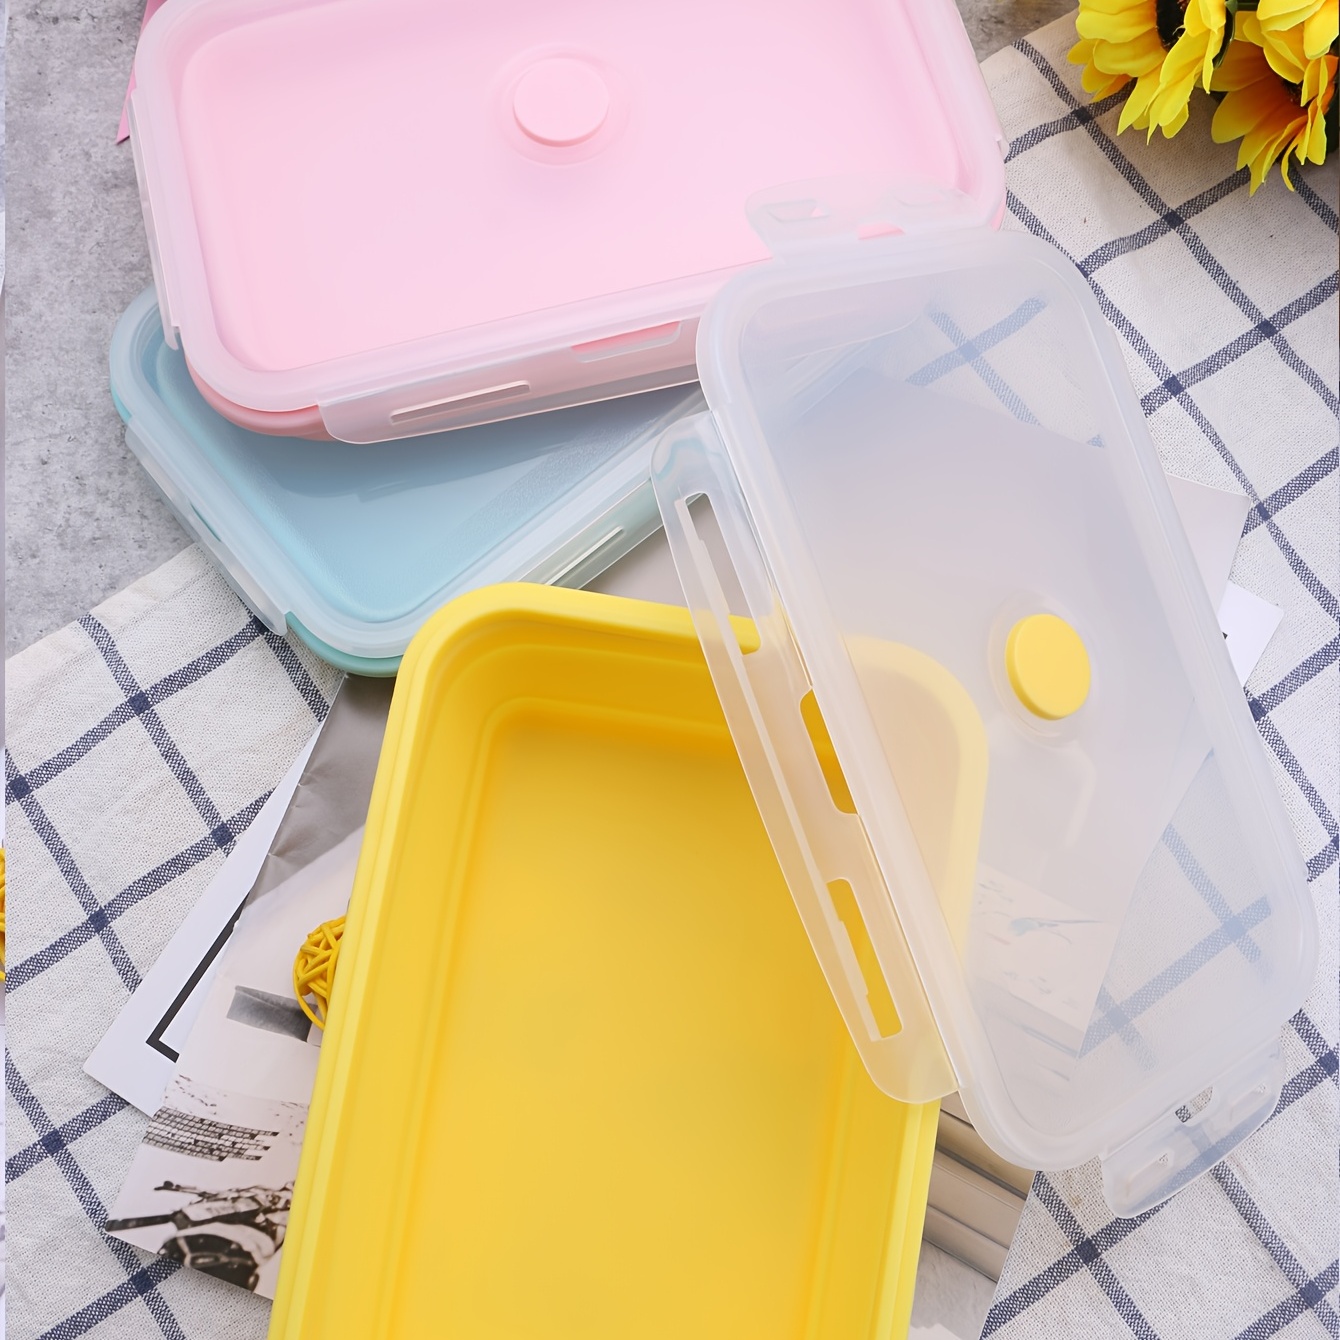 Silicone Square Lunch Box  Reusable, Eco-Friendly Food Containers – Sili  Home Co.